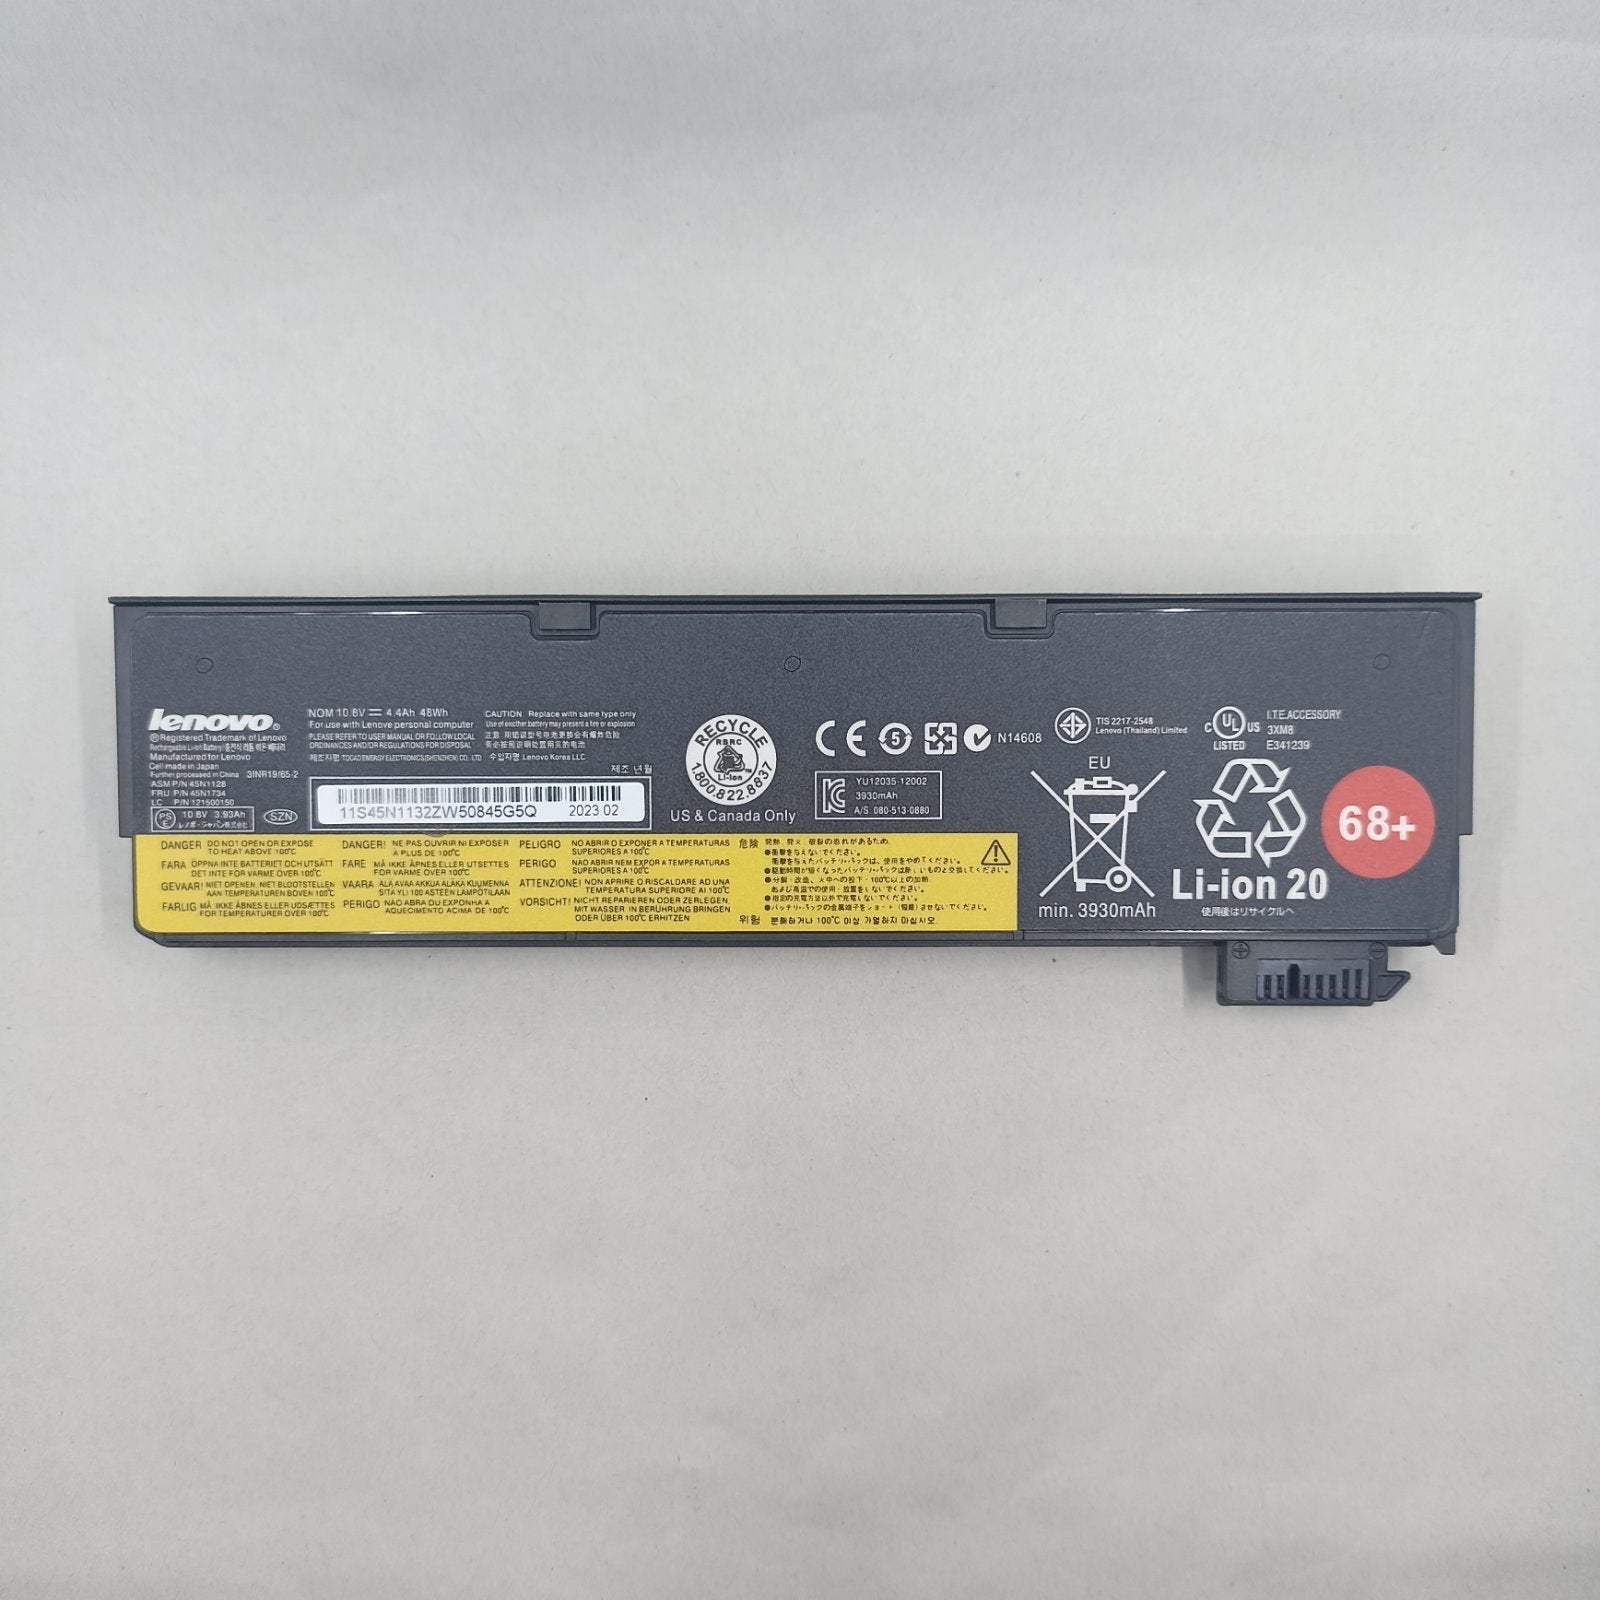 Replacement Battery for Lenovo T470P ThinkPad A1